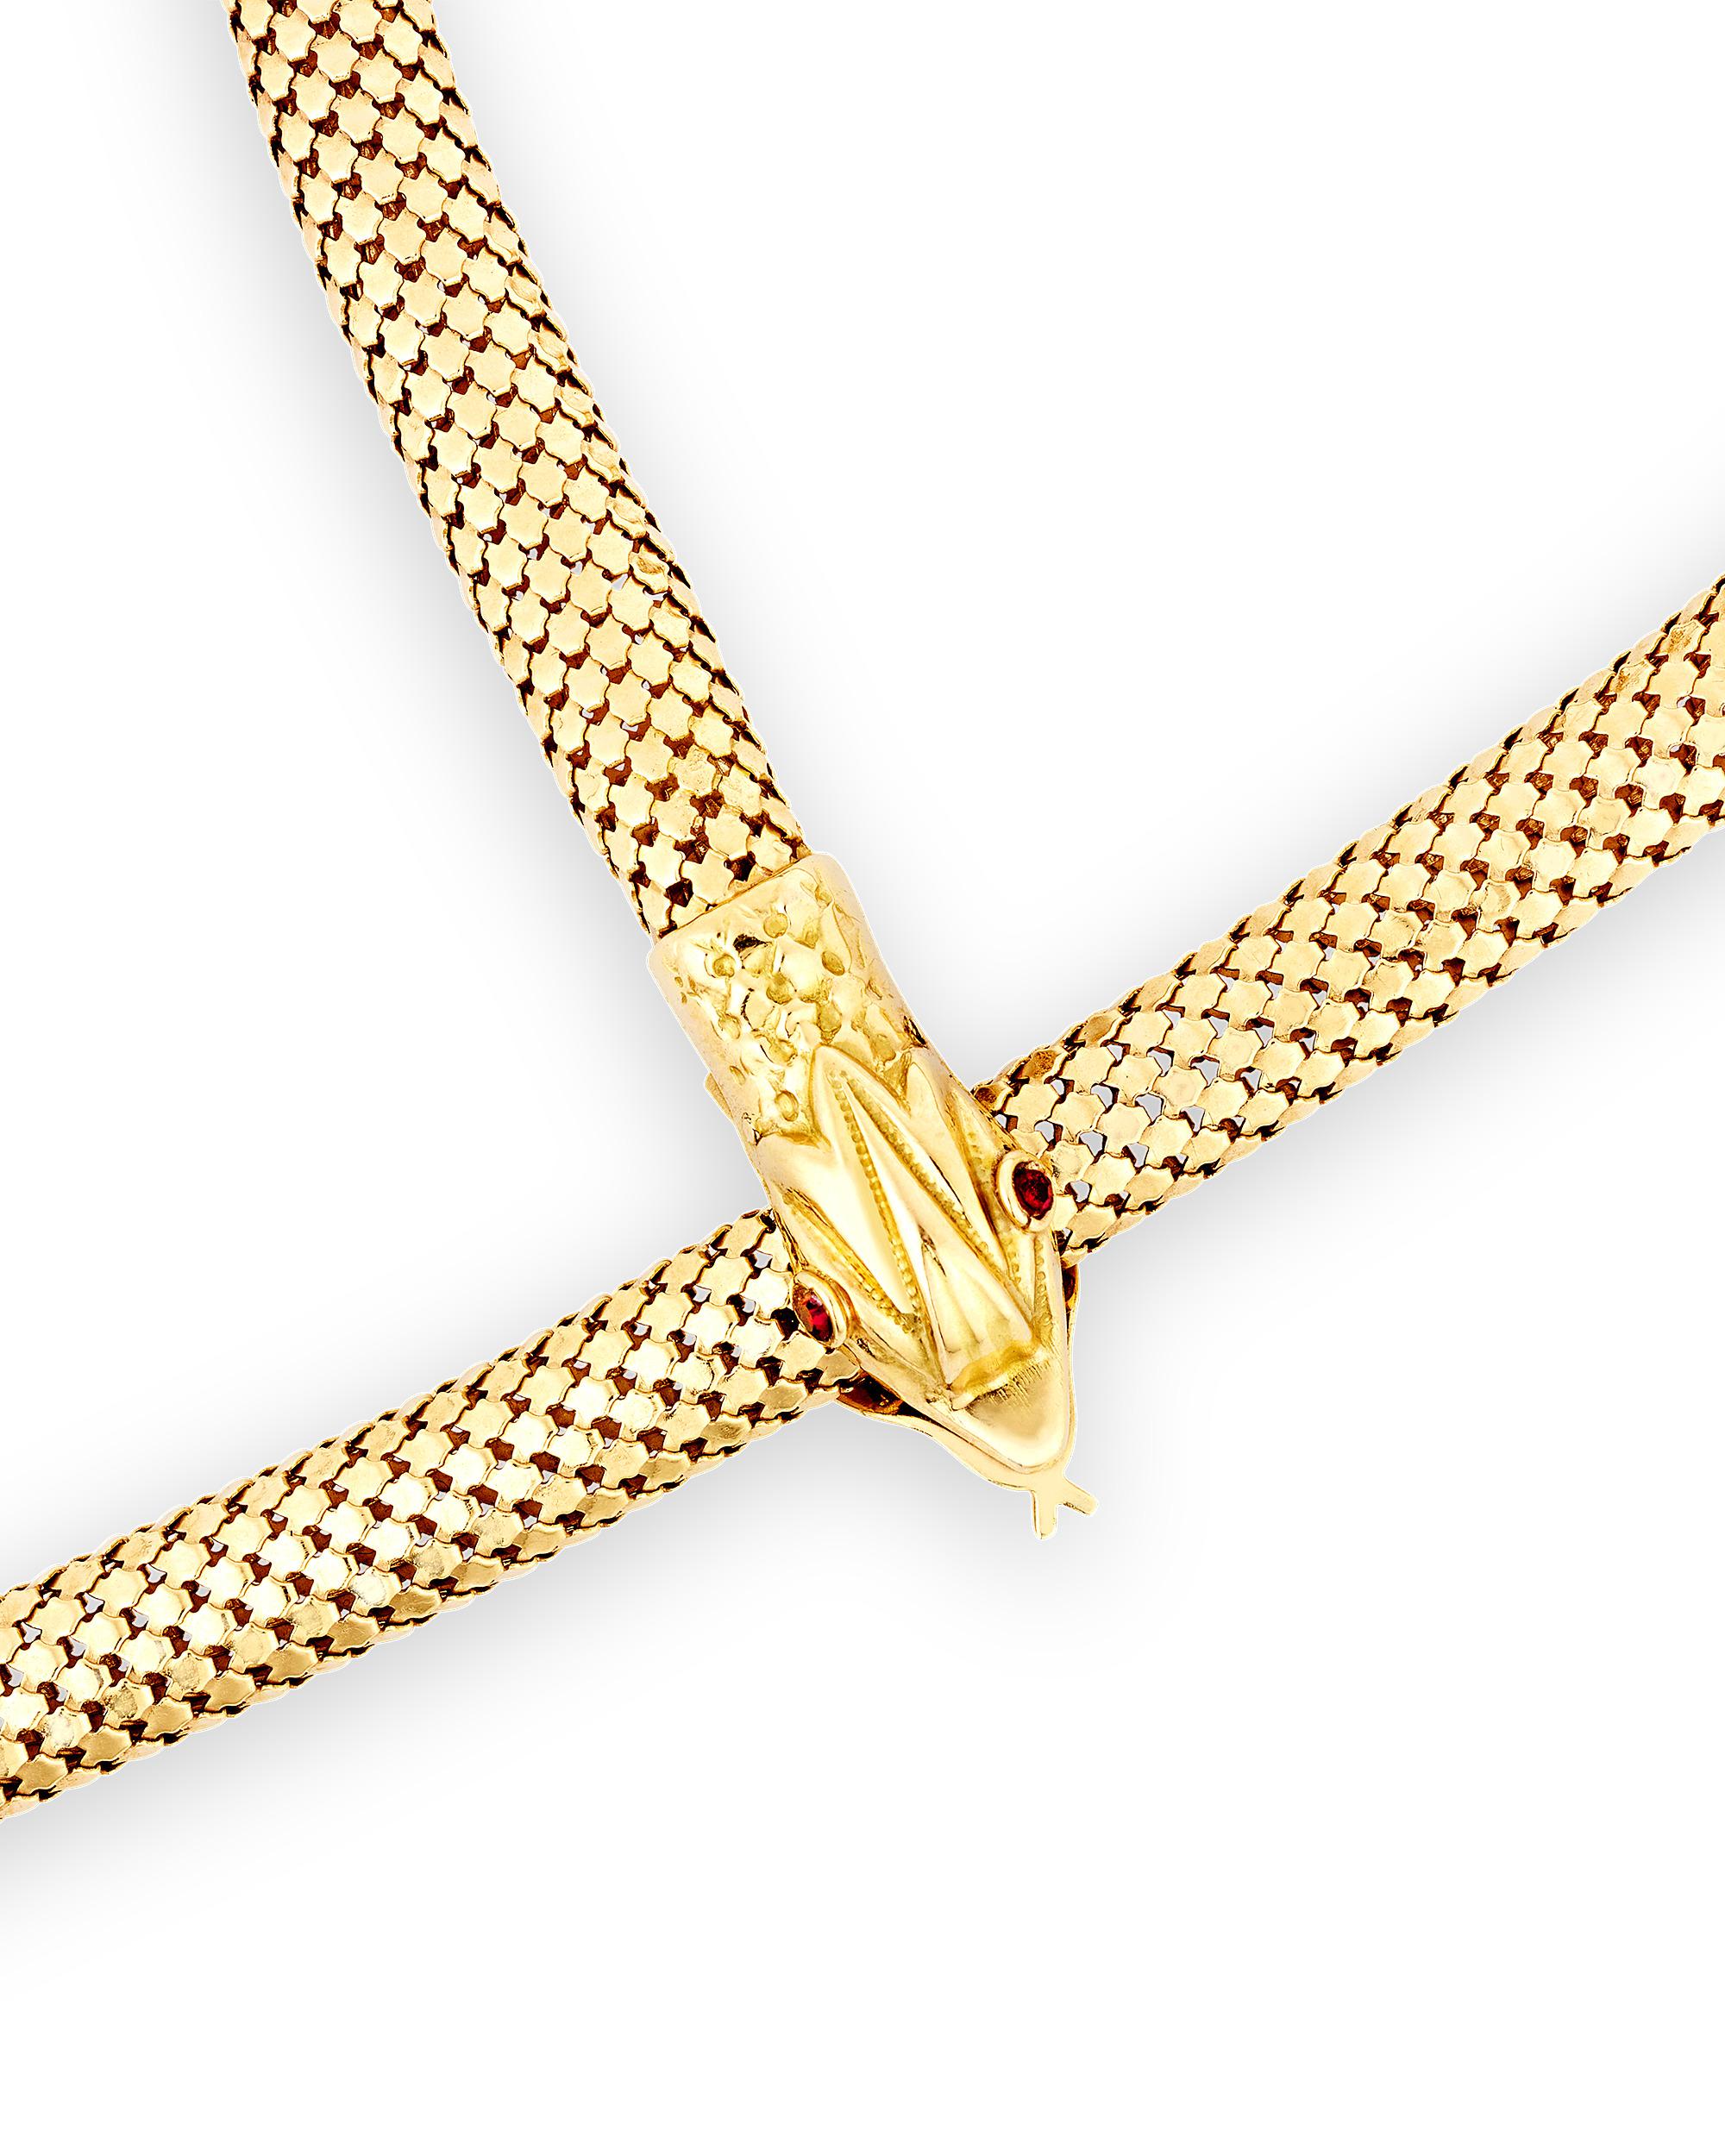 Elegant and unique, this sophisticated 18K gold necklace takes the shape of a snake. The lustrous necklace is composed of a beautiful gold cord complete with scale-like details and a snake head and tail. The snake's head is embellished with two red